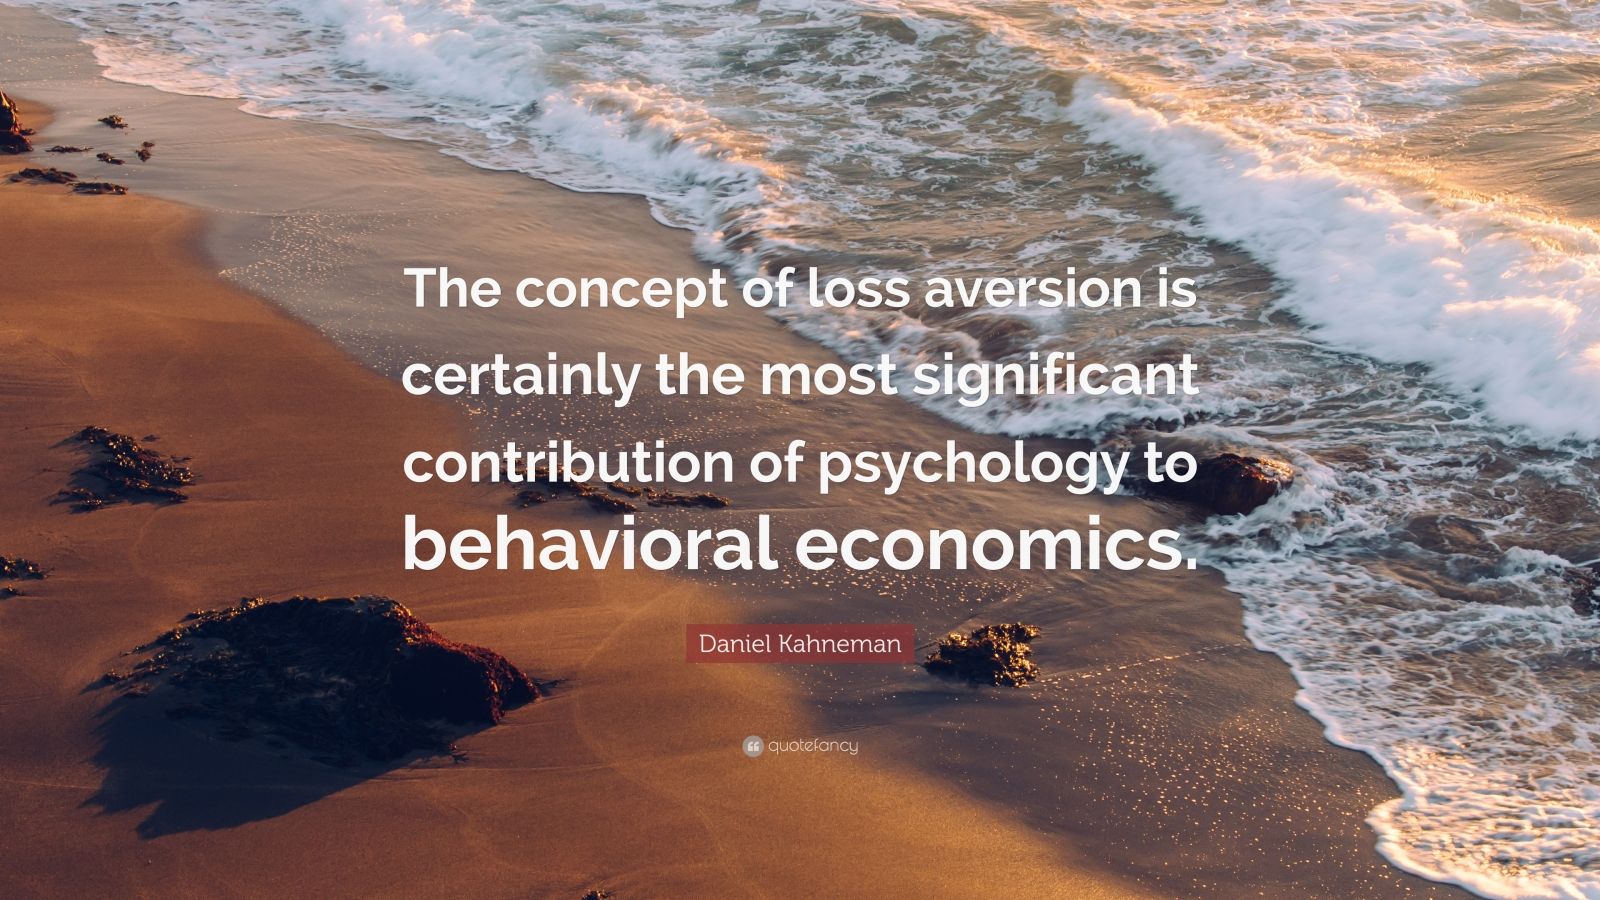 Daniel Kahneman Quote: “The concept of loss aversion is certainly the